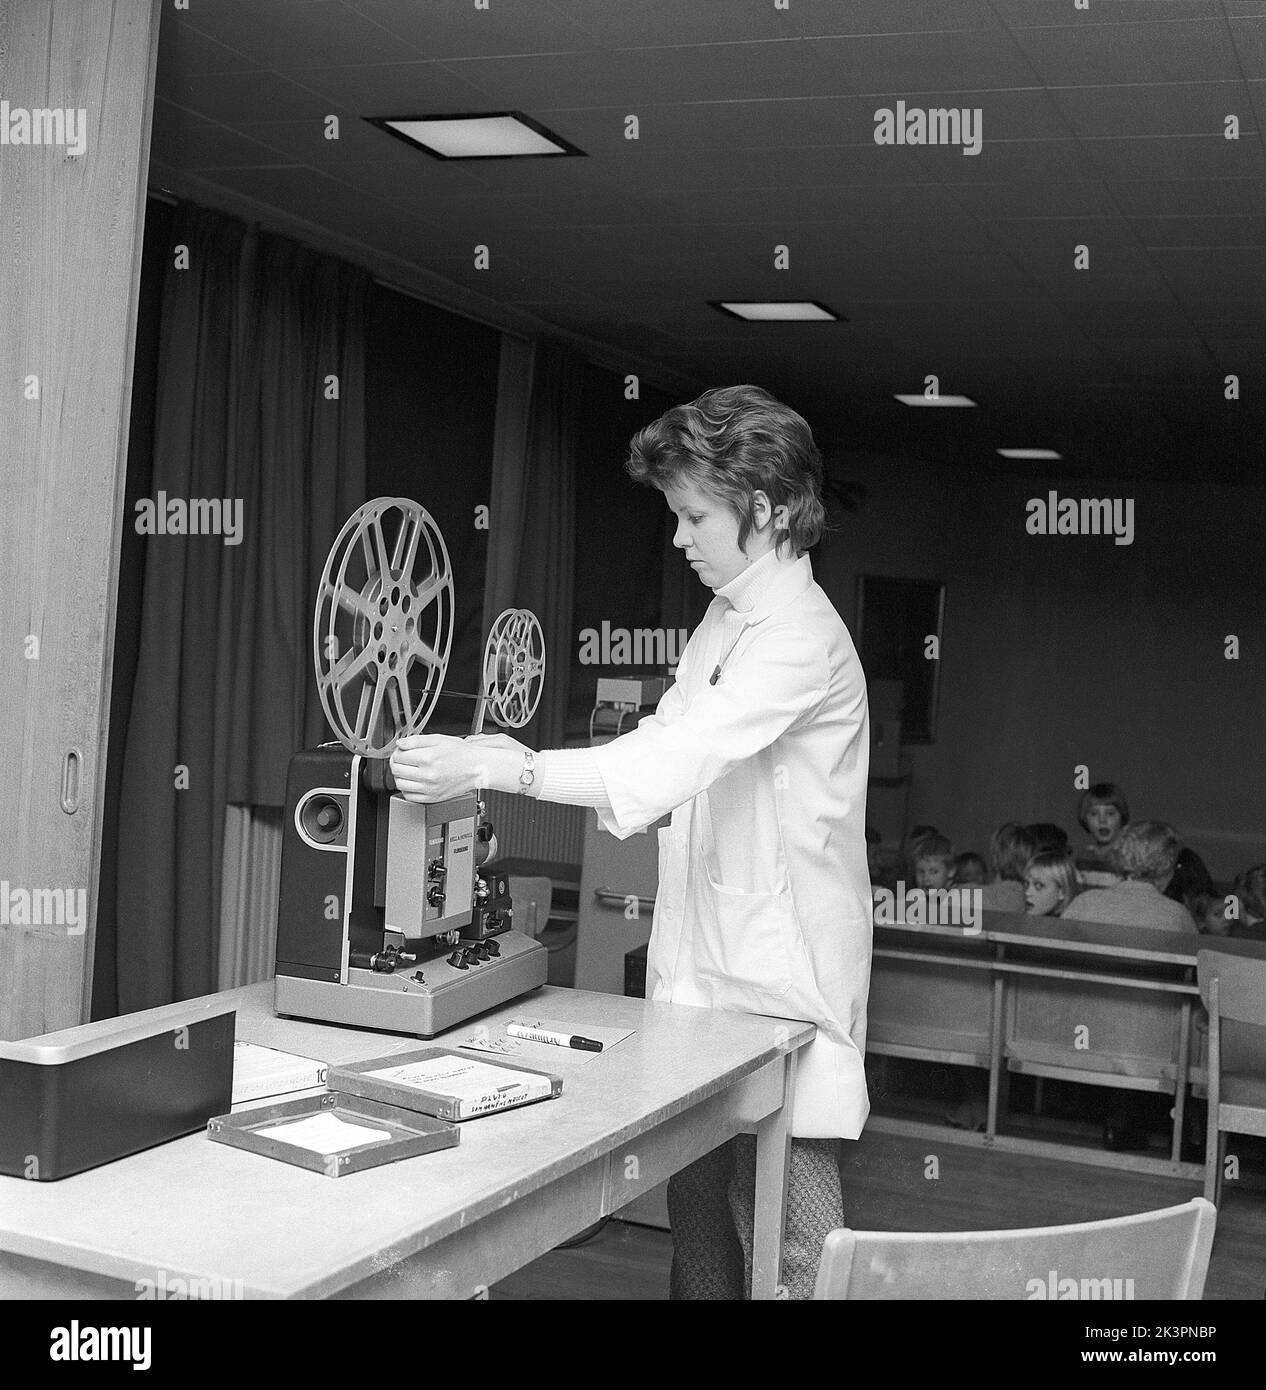 In the 1960s. A young female teacher with a film projector, mounting the film roll in the back of the classroom. Sometimes short films were shown in the classroom or in a special viewing room, not only for educational puroposes but for entertainment. The film had sound. Once the film roll was viewed, the film was rolled onto a reciever roll and needed to be winded back. The students waiting for the film to start is seen sitting in the background. Sweden 1968 ref CV77 Stock Photo